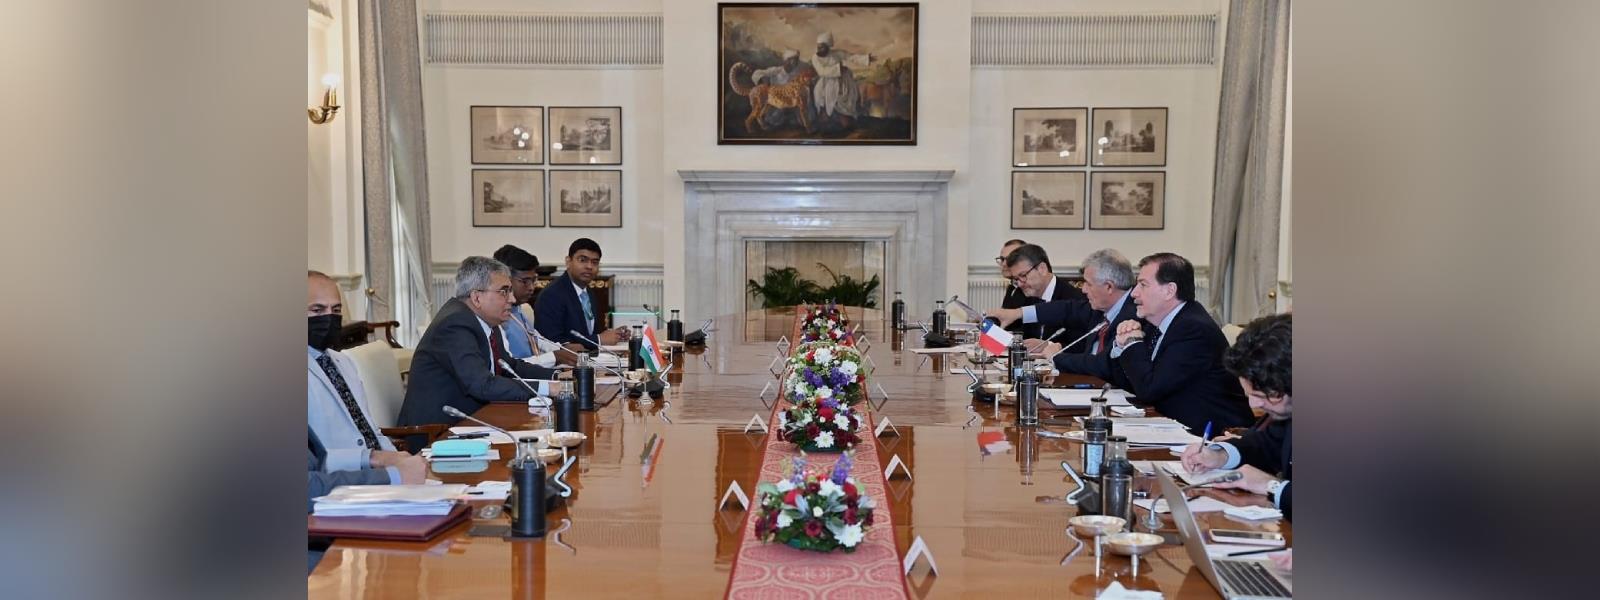 8th India-Chile Foreign Office Consulation held in New Delhi